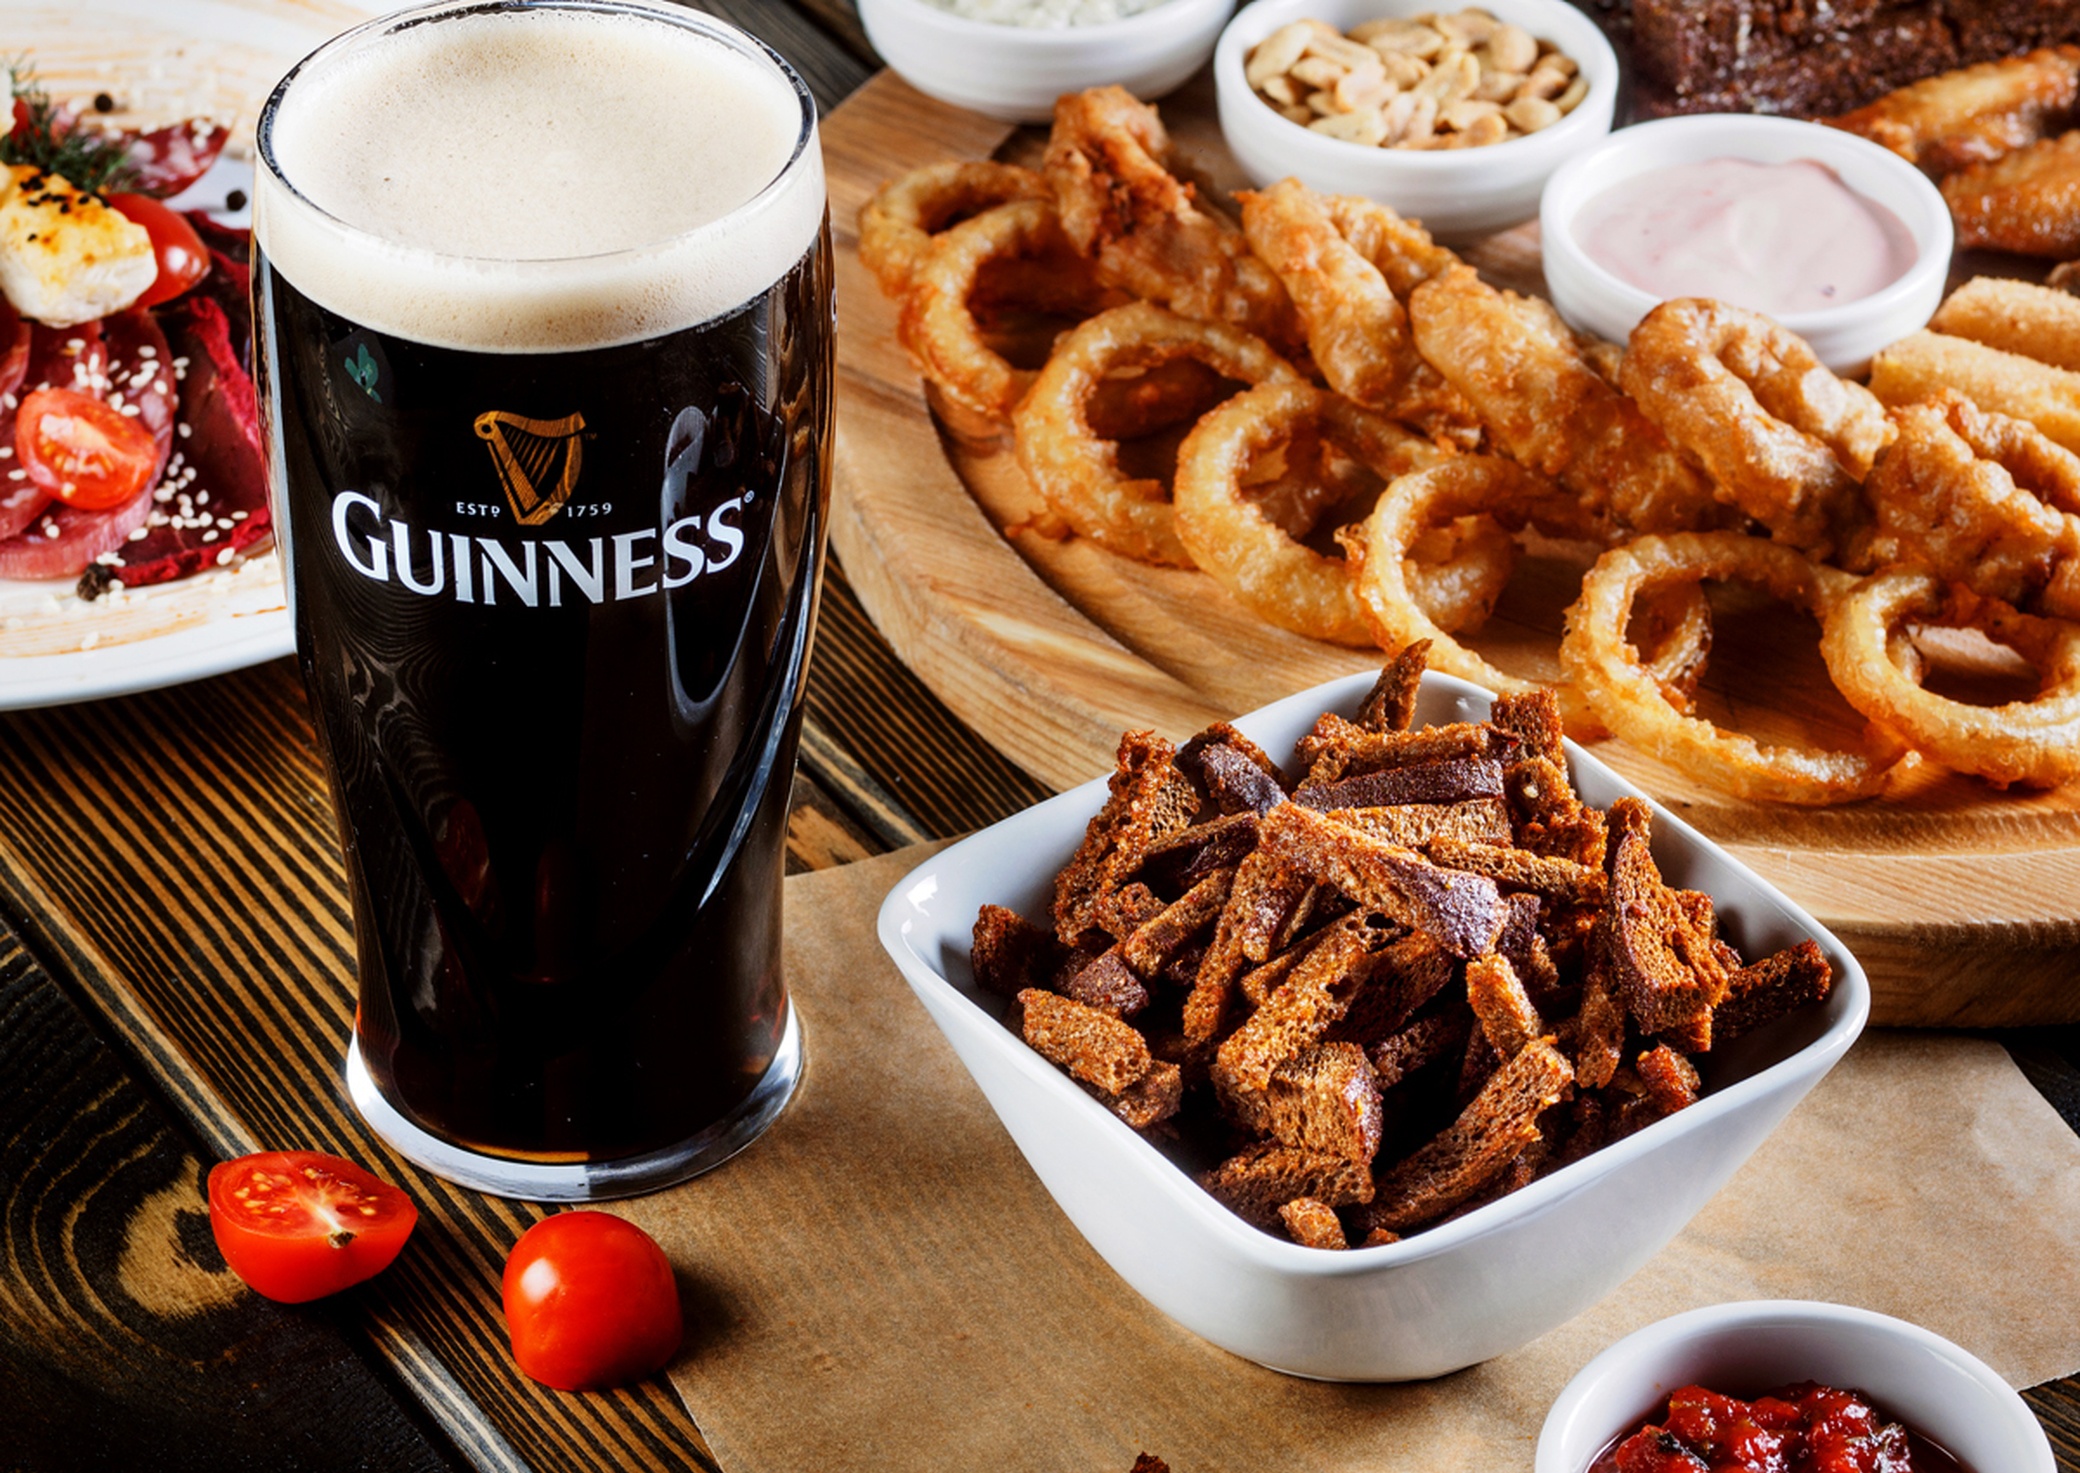 guinness, products, alcohol, beer, drink